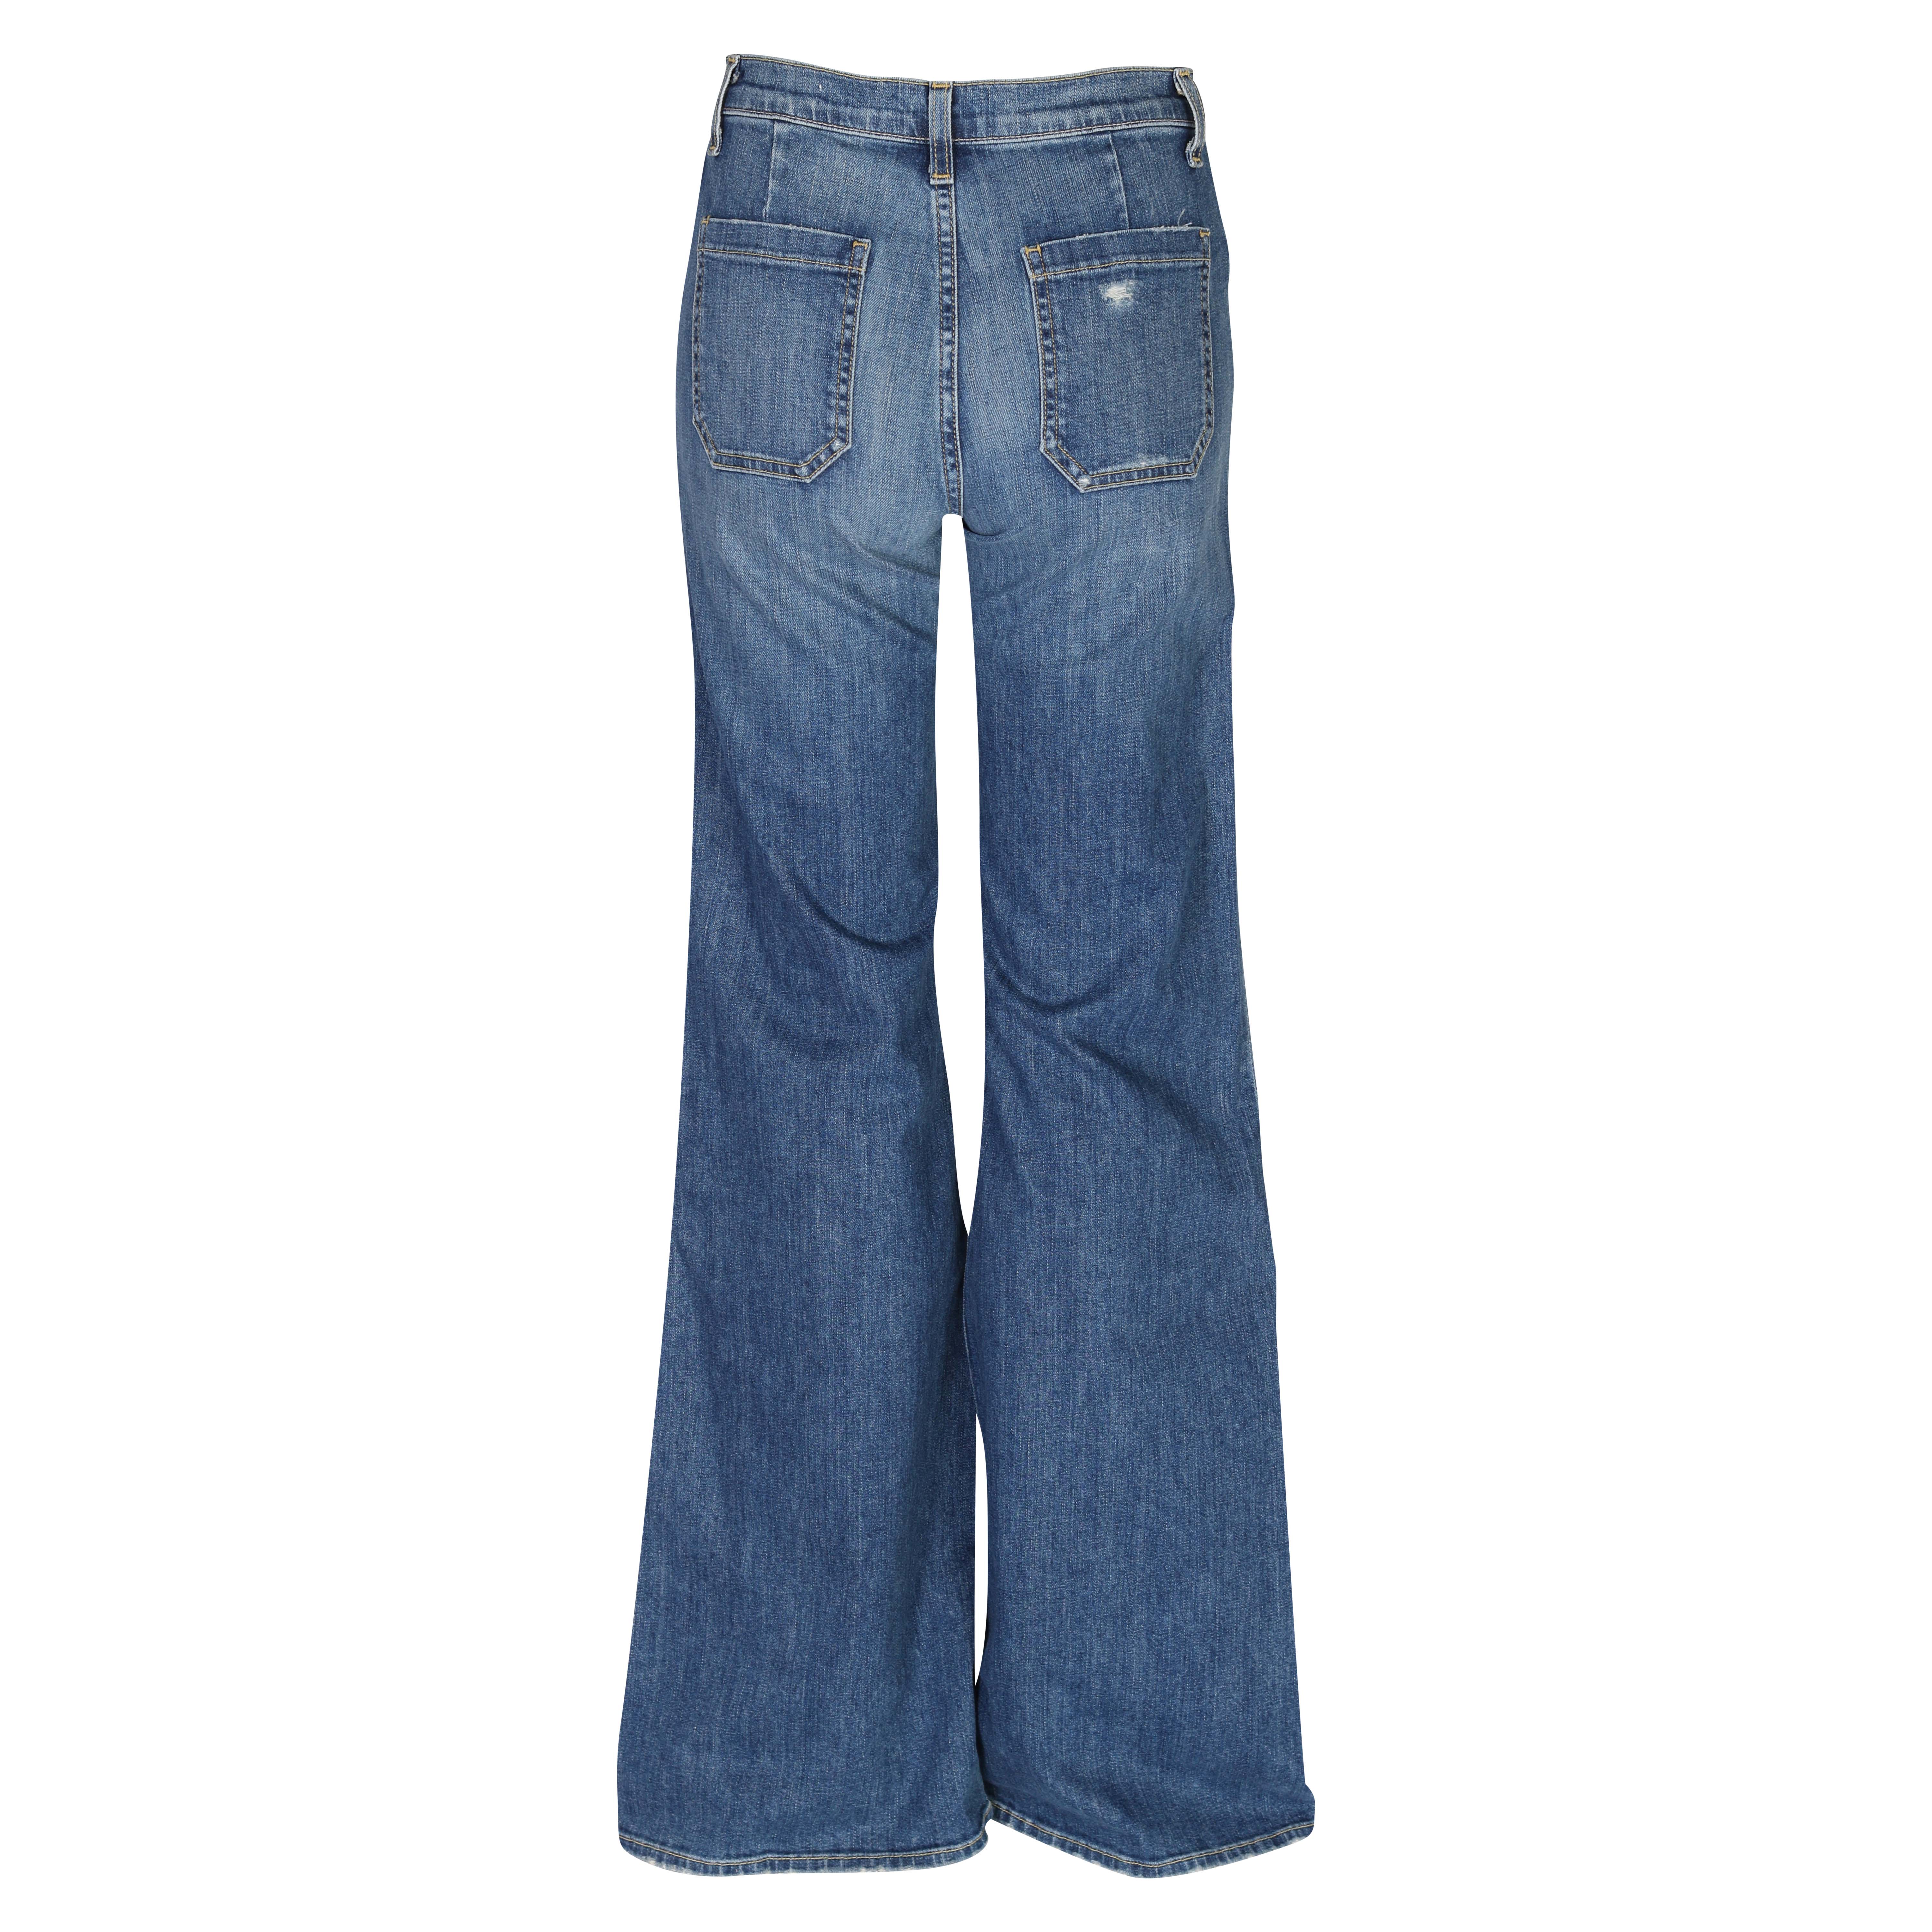 Nili Lotan Florence Jeans in Classic Washed